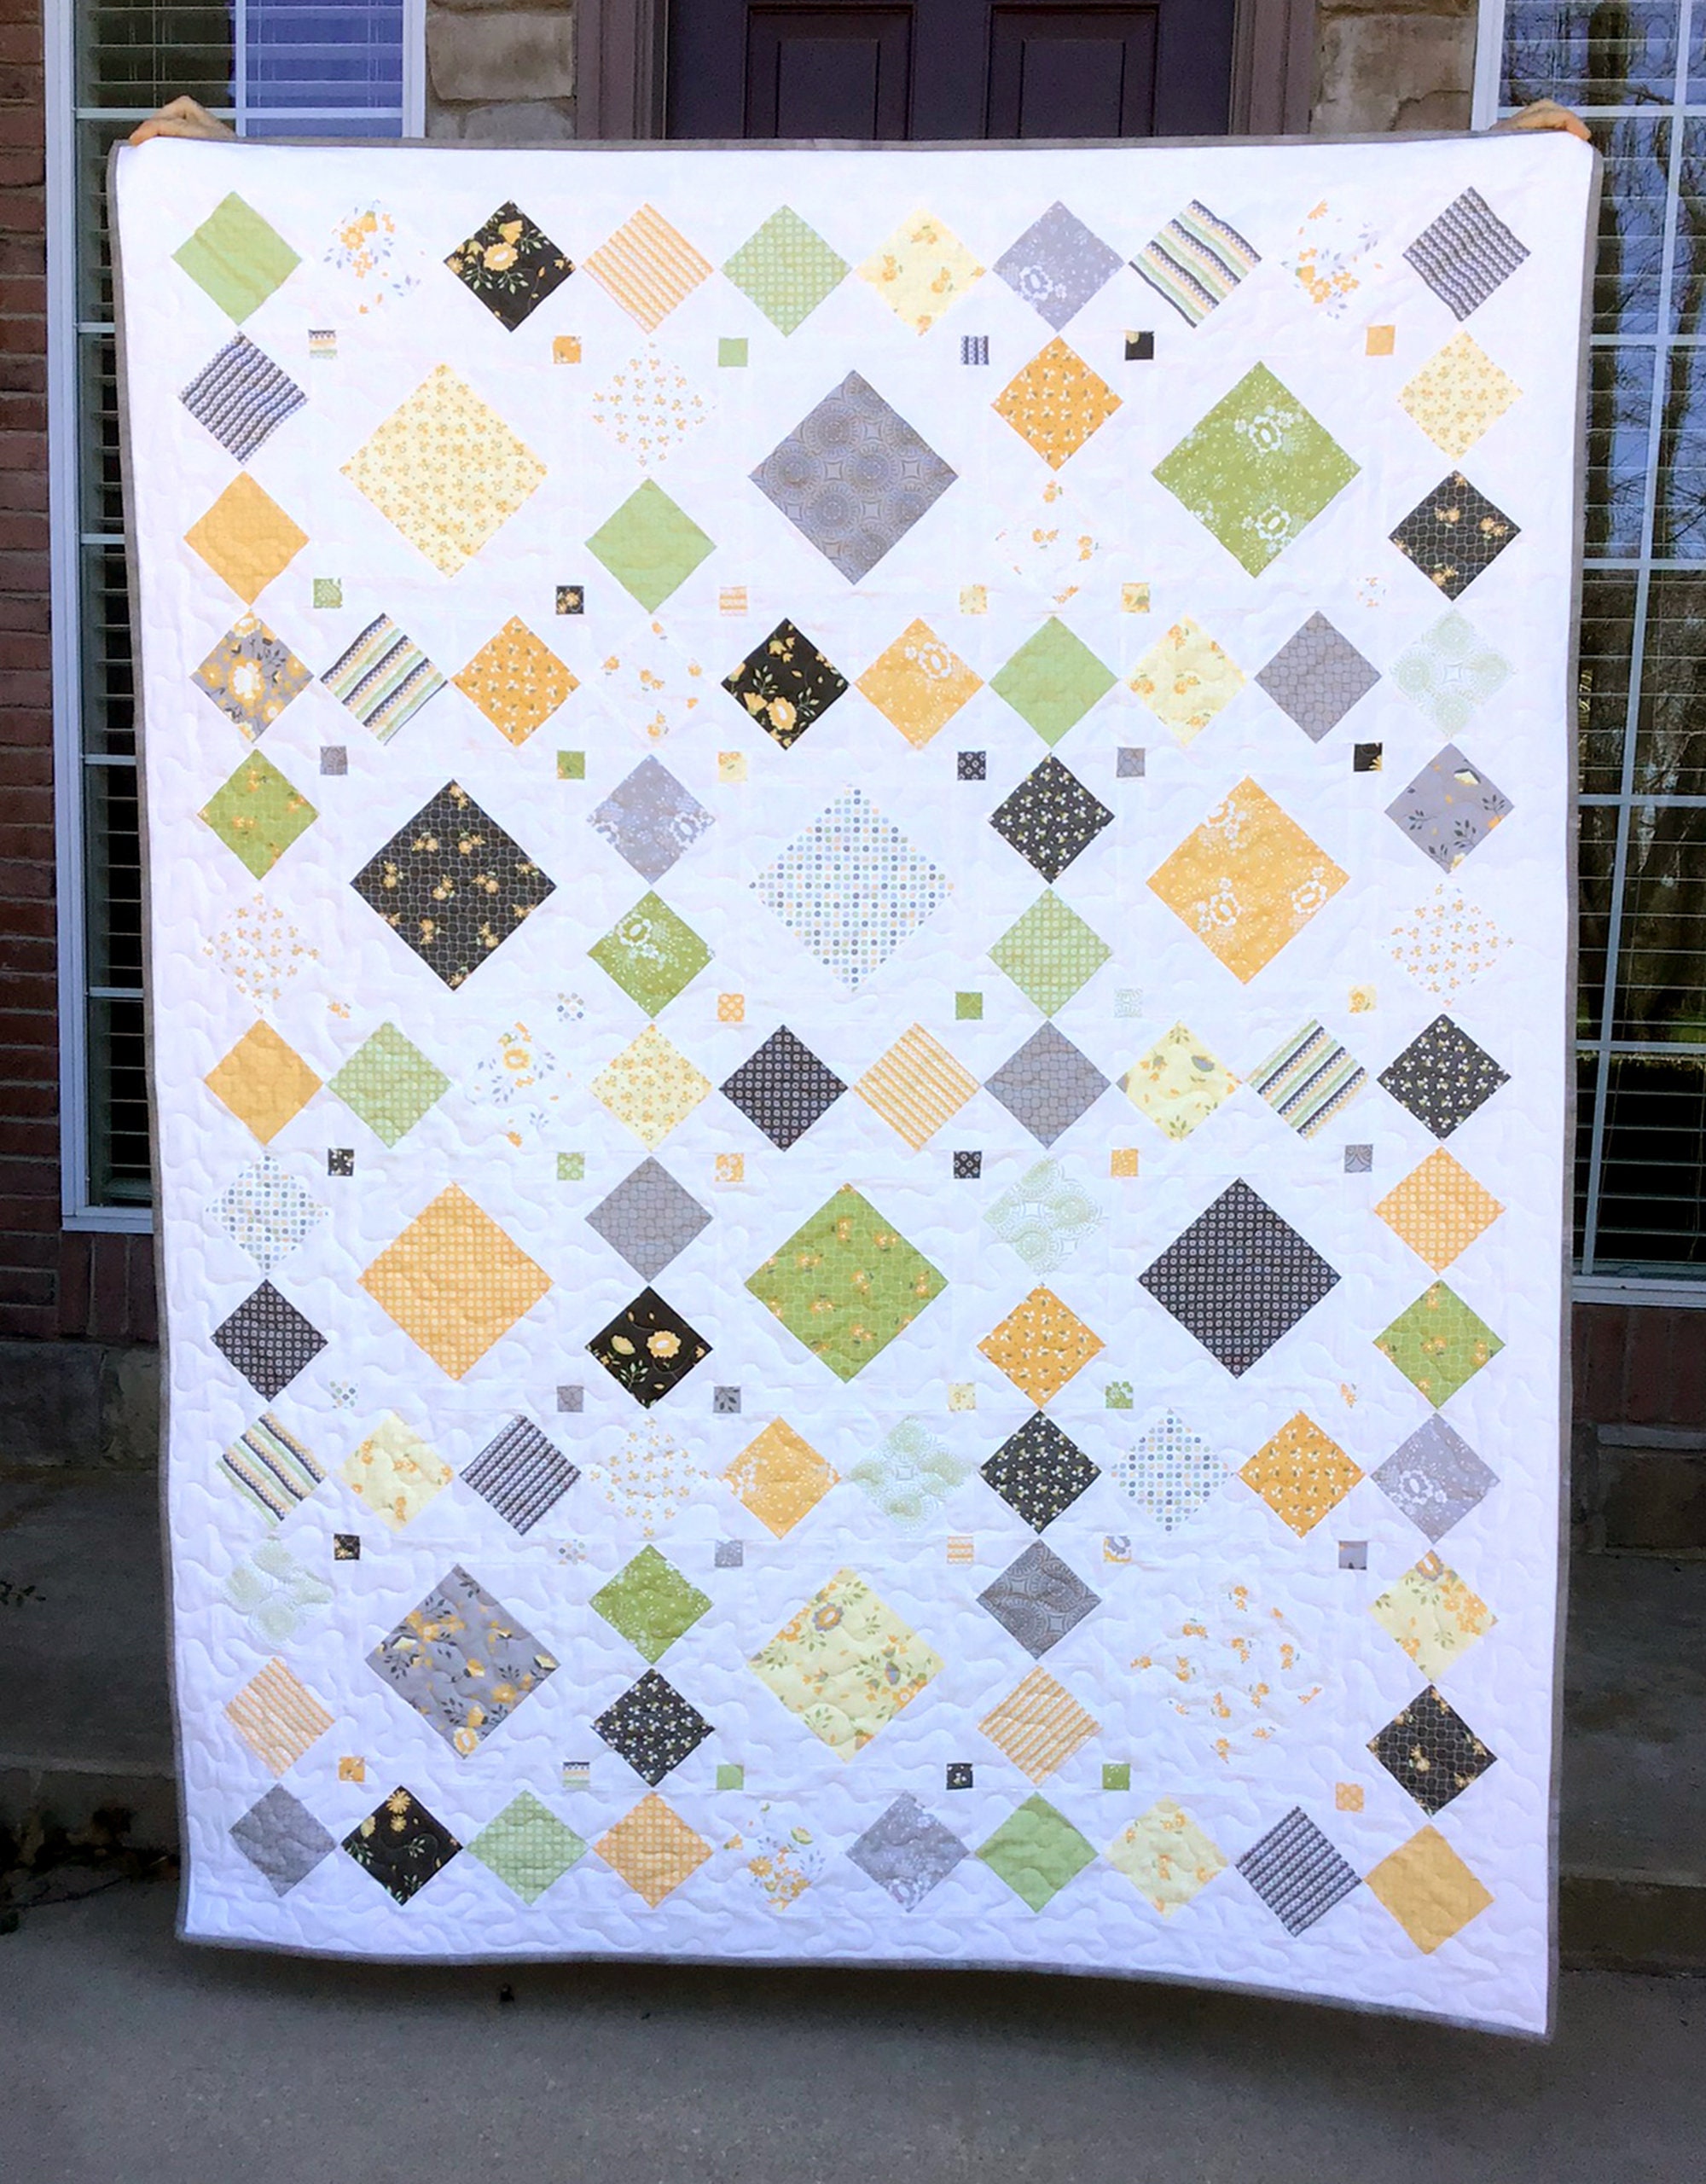 10 Free Modern Quilt Patterns For Beginners! - Making Things is